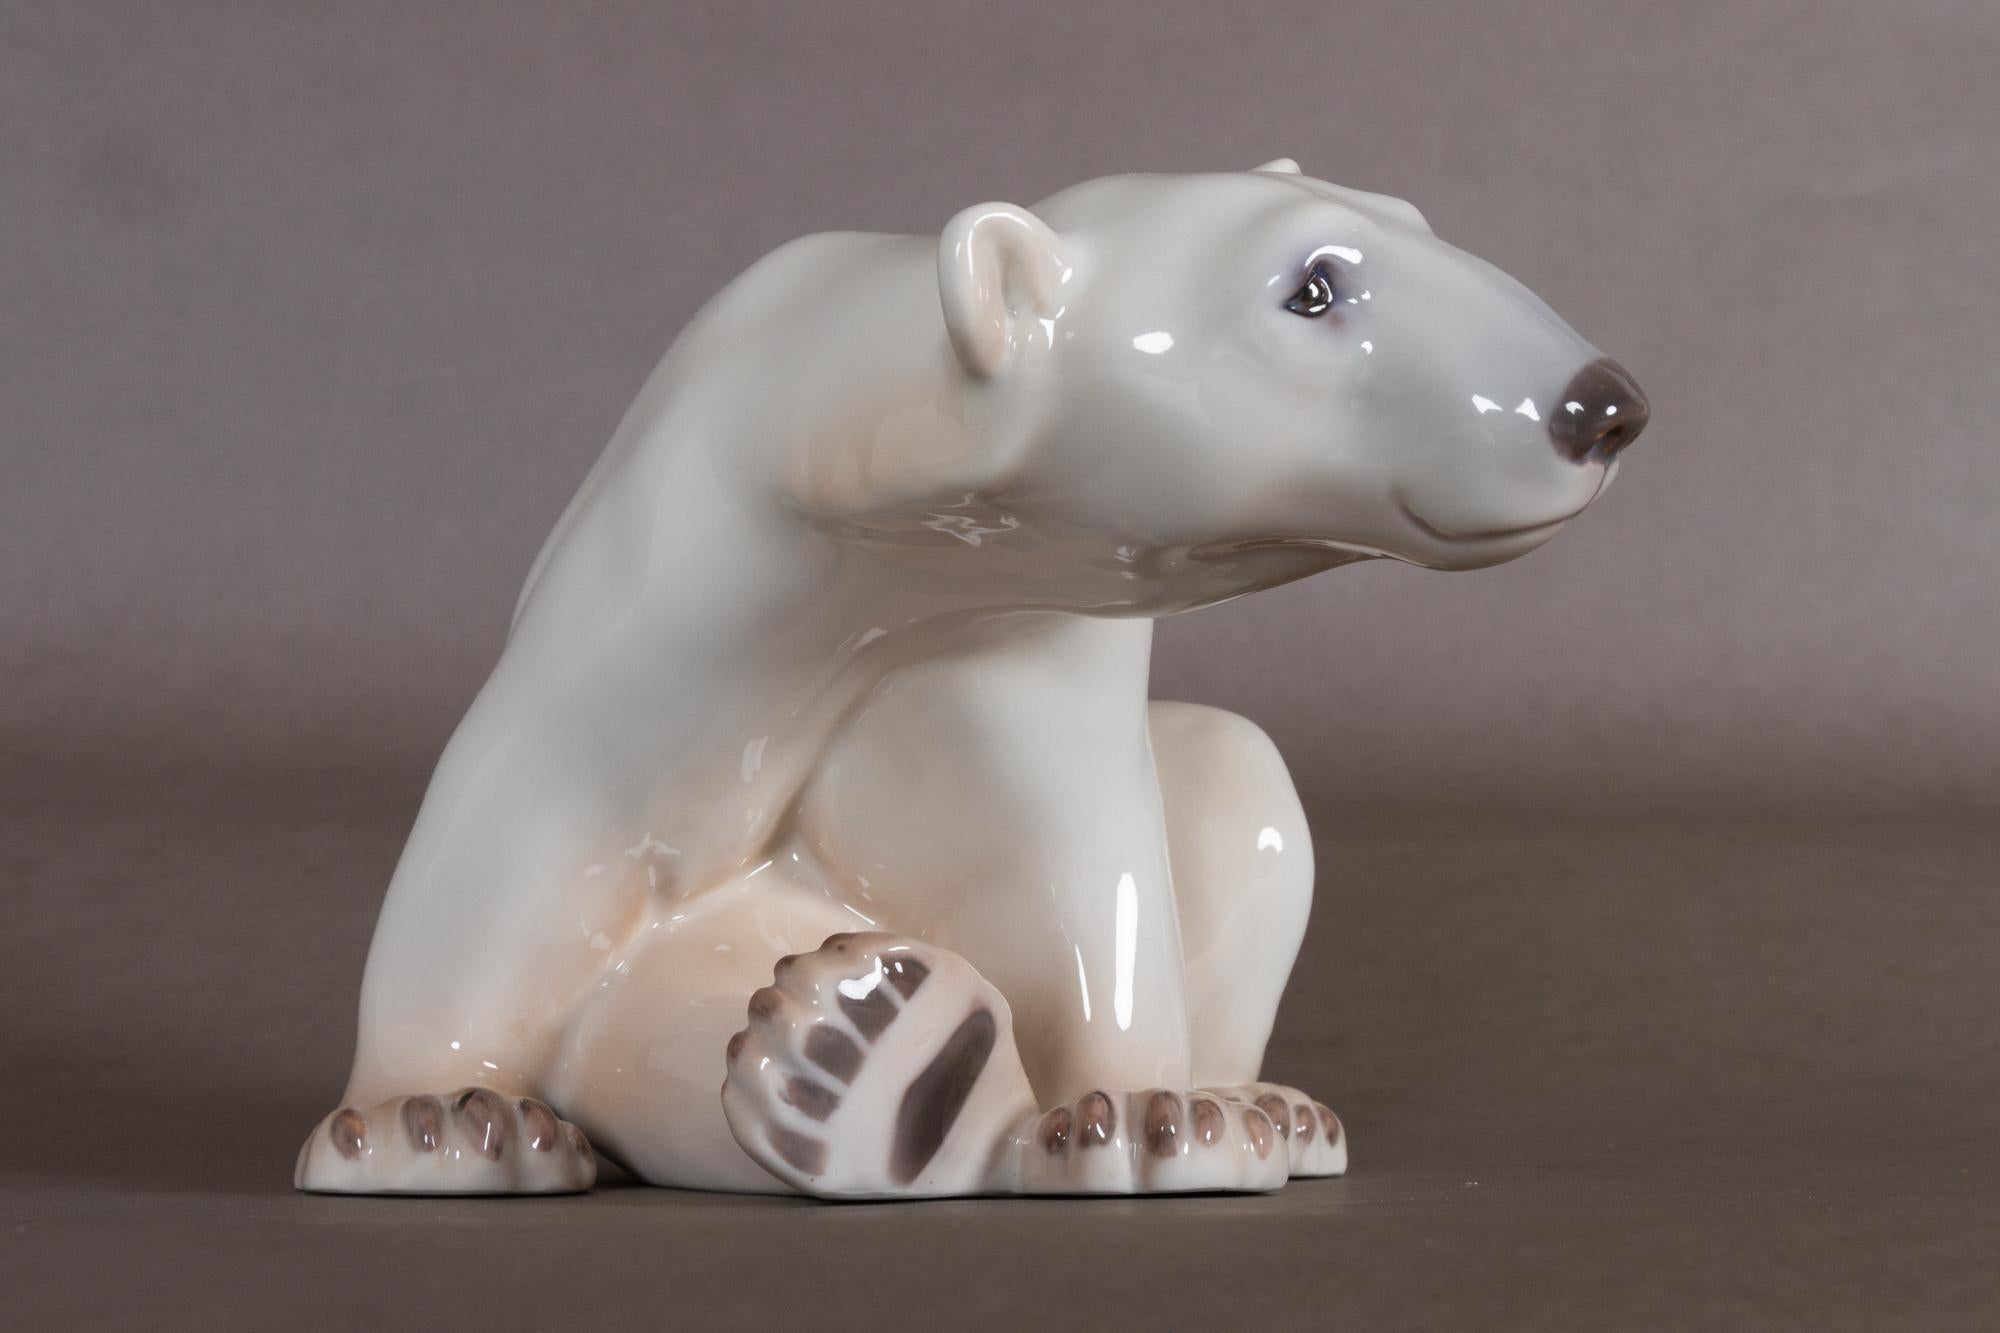 Danish porcelain polar bear figurine by Dahl Jensen for Bing & Grøndahl
Sculpture of sitting polar bear designed by Danish artist Dahl Jensen. Very lifelike coloration, and very expressive facial features.
This particular figurine was made between